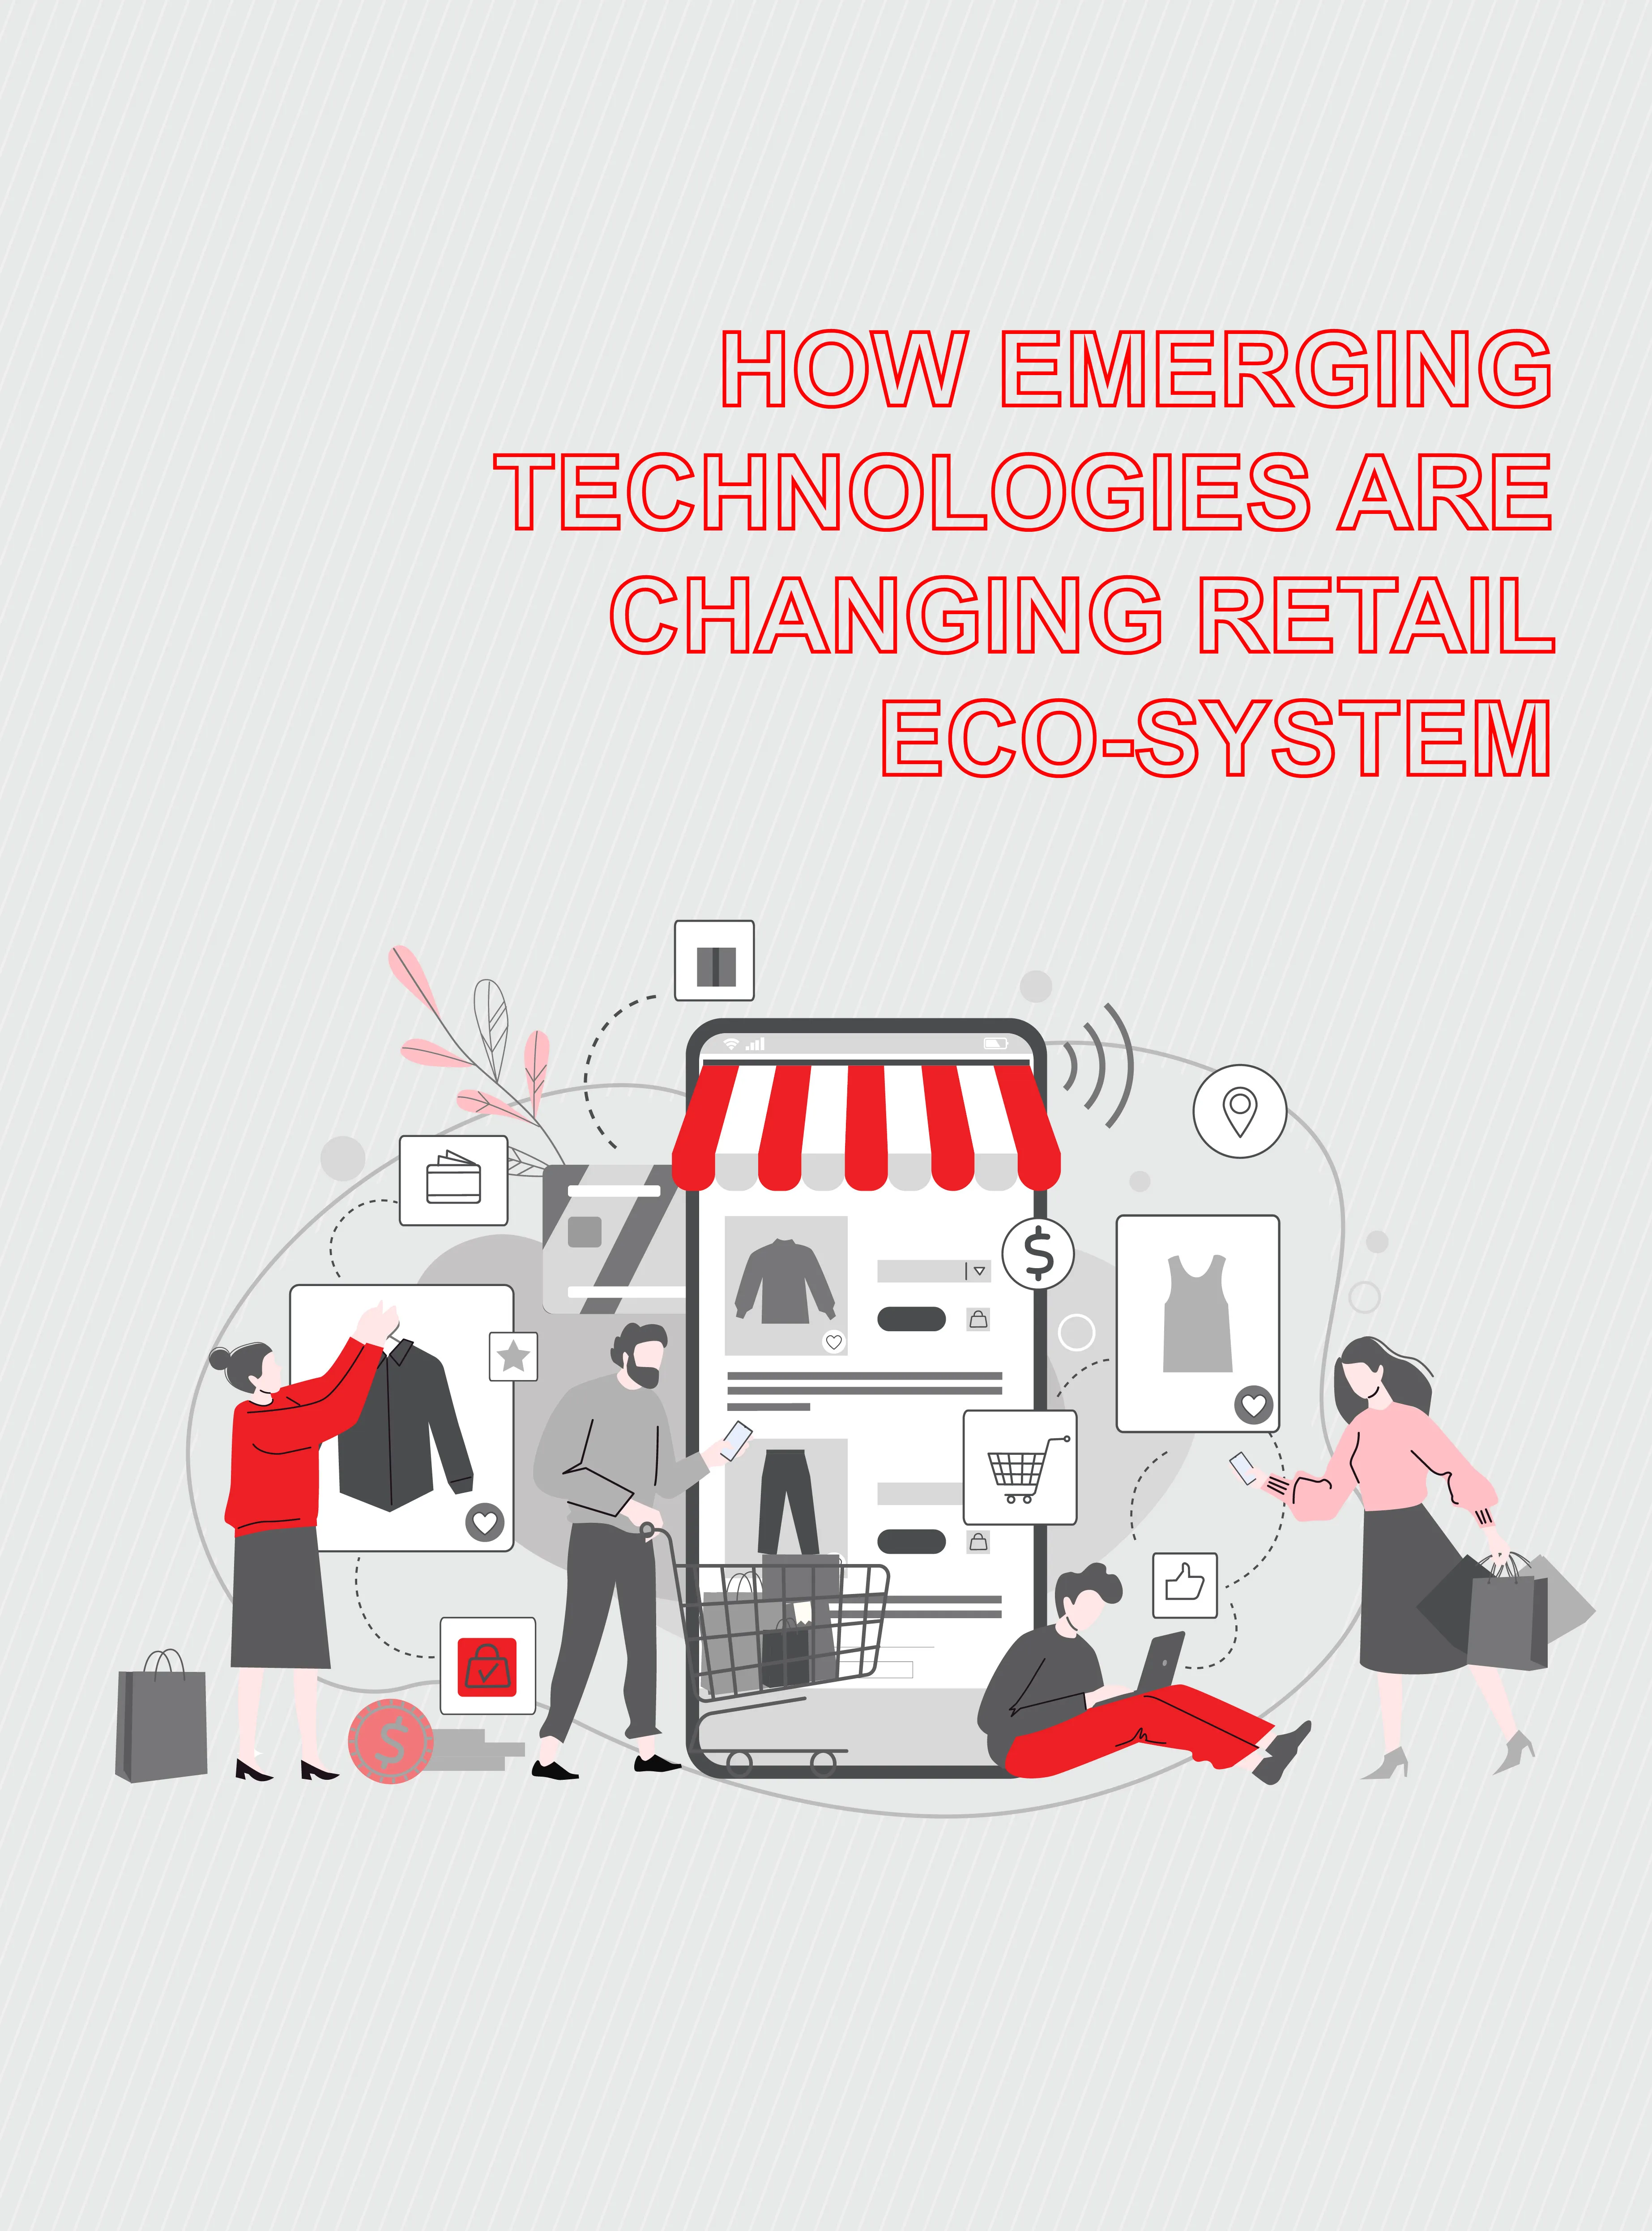 How metaverse is posing possibilities for shoppers - an emerging frontier